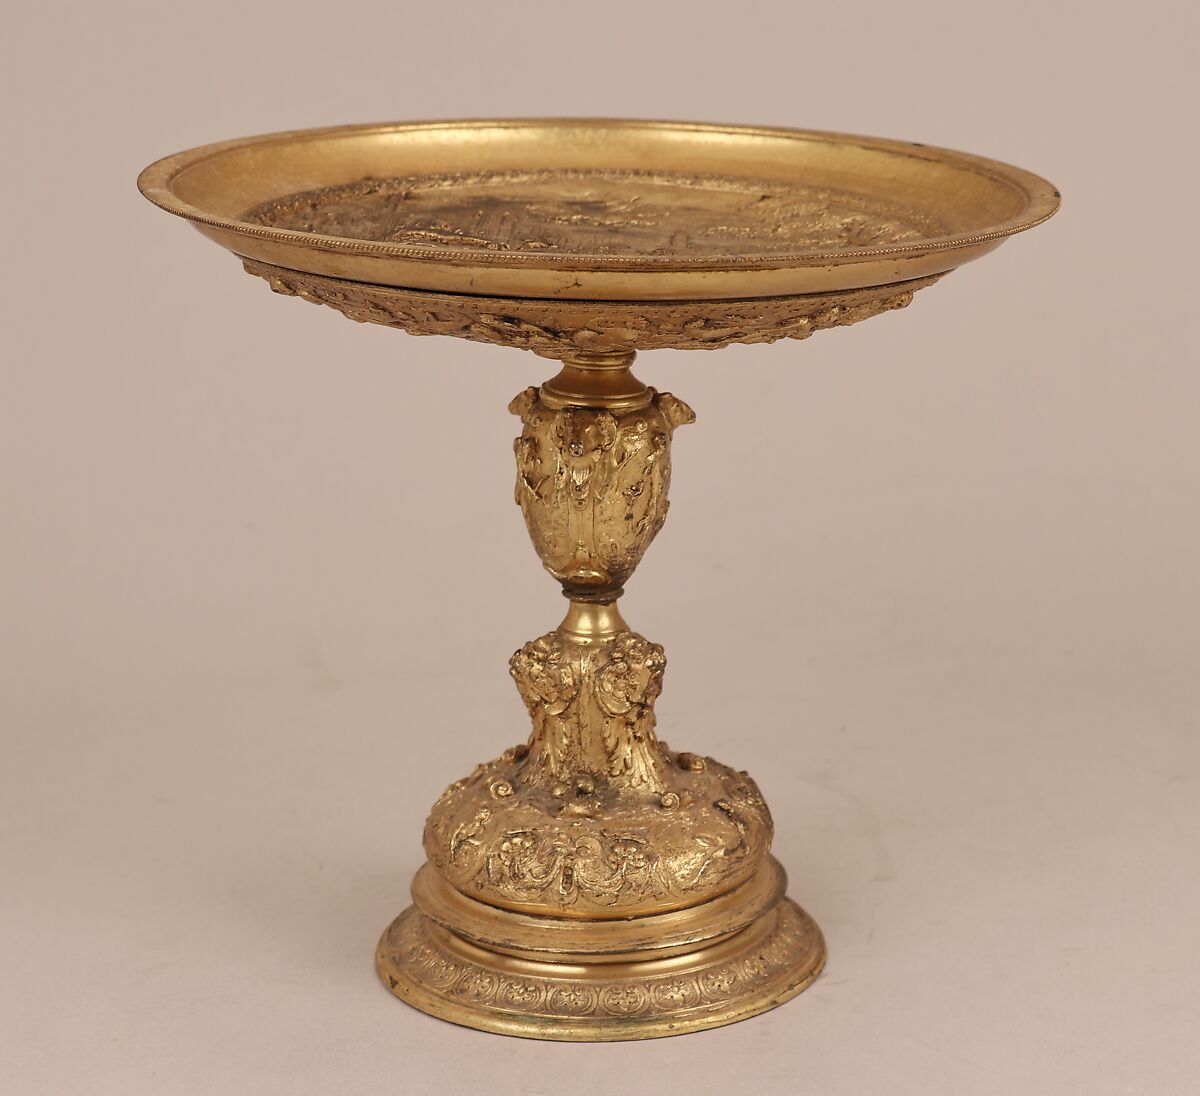 Tazza, After an original attributed to Benvenuto Cellini (Italian, Florence 1500–1571 Florence), Silver gilt, British, after Italian, Florence original 